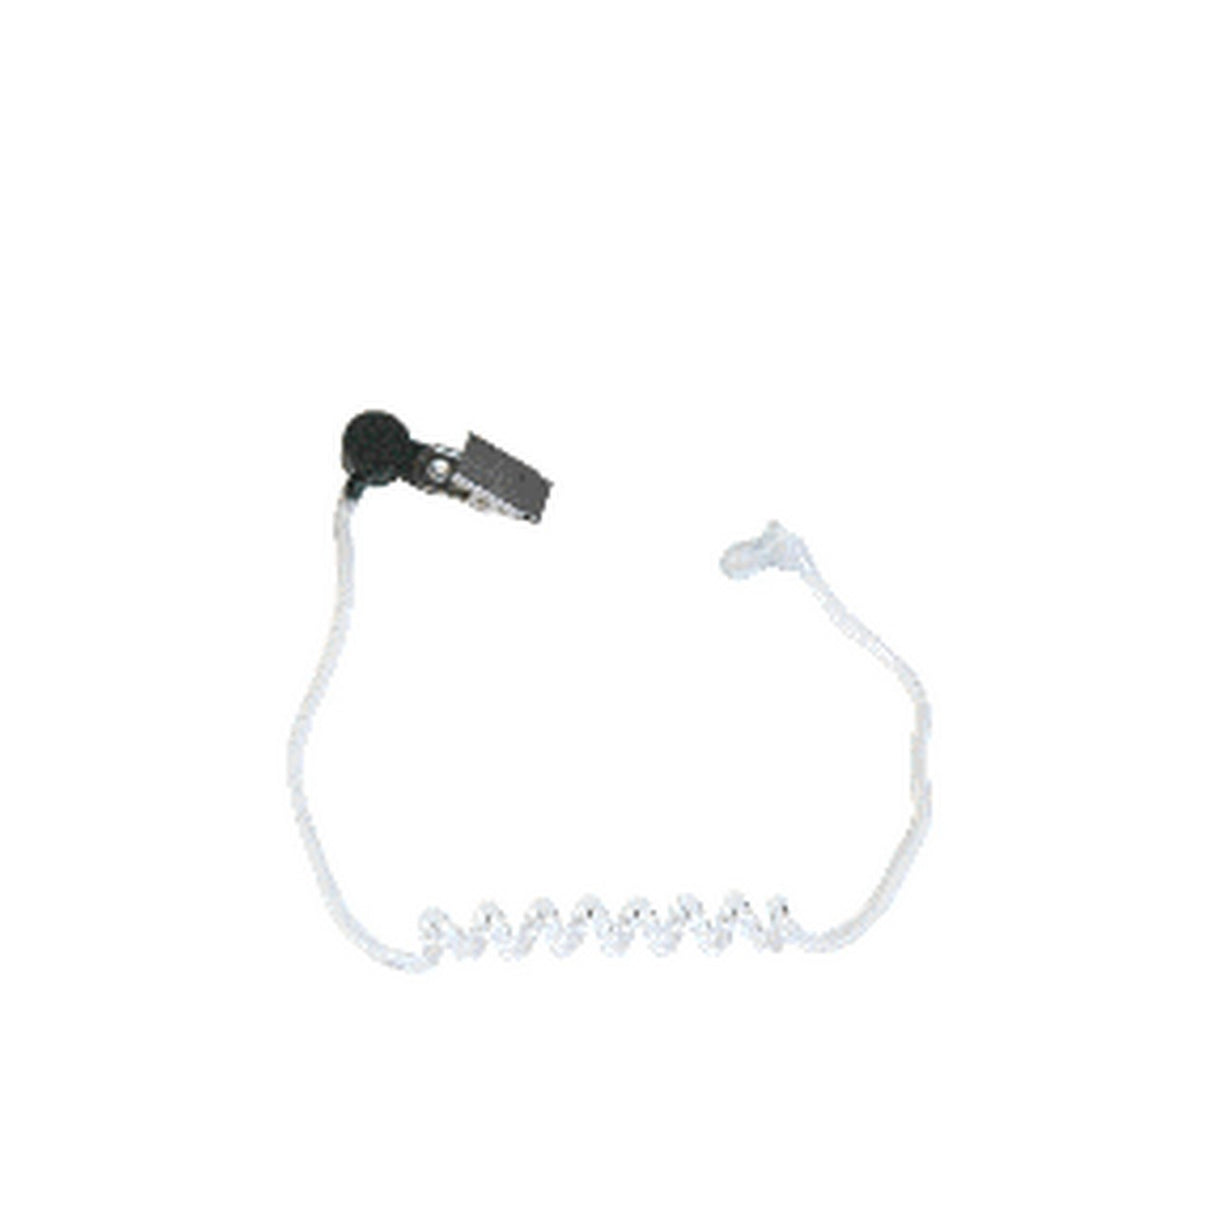 Eartec SSTBS | Replacement Clear Ear Tubes for SST Headsets